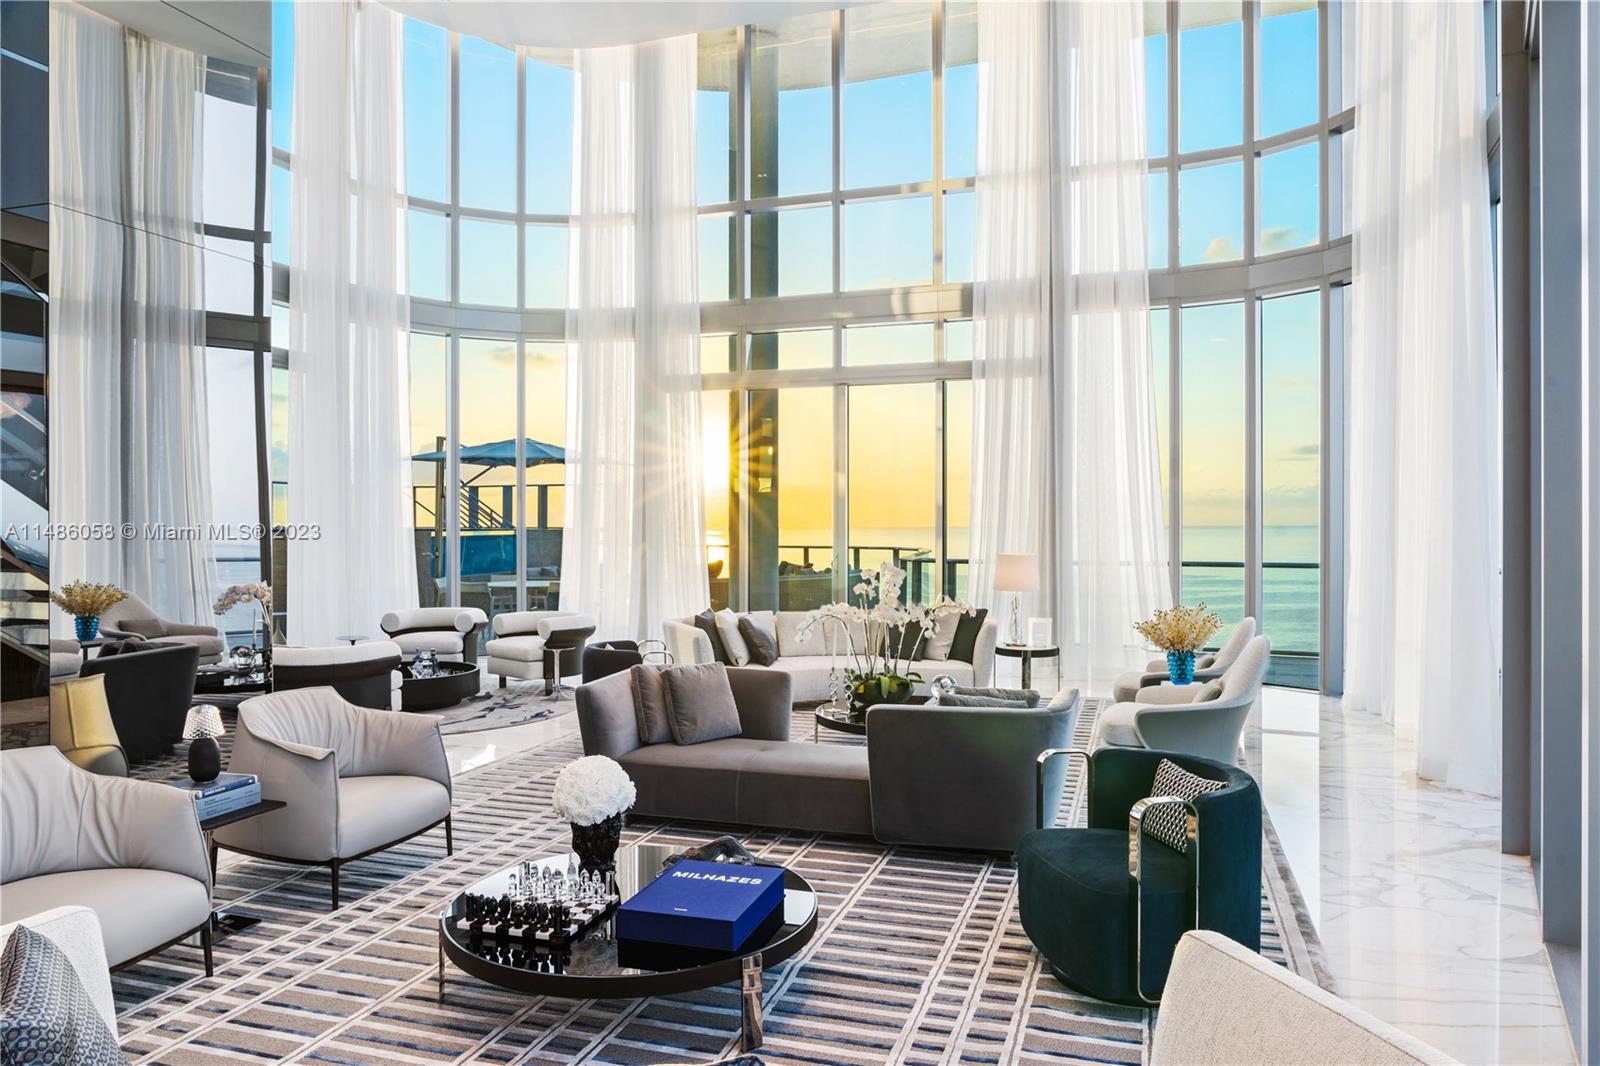 The epitome of high-end living. Be the first one to live in this ultra-luxurious fully furnished 2-story PH residence at Chateau Beach Residences in Sunny Isles Beach. Spanning the entire 32nd and 33rd floors, this bright & airy residence, features 4BD/5+3 BA. The home's 2nd floor showcases a separate principal suite wing w/ a den, gym, dual walk-in closets, beauty massage room & sauna. Features include a spacious great room, a family/media room, private elevator, custom millwork, Lasvit chandeliers, Italian furniture by Minotti, w/accessories by Lalique, Baccarat, Christoffle & FENDI. Boasting expansive views of the Atlantic Ocean, Intracoastal Waterway, downtown Miami and Fort Lauderdale, the residence offers a 4,523 SF wraparound terrace w/ an outdoor pool deck & a private swimming pool